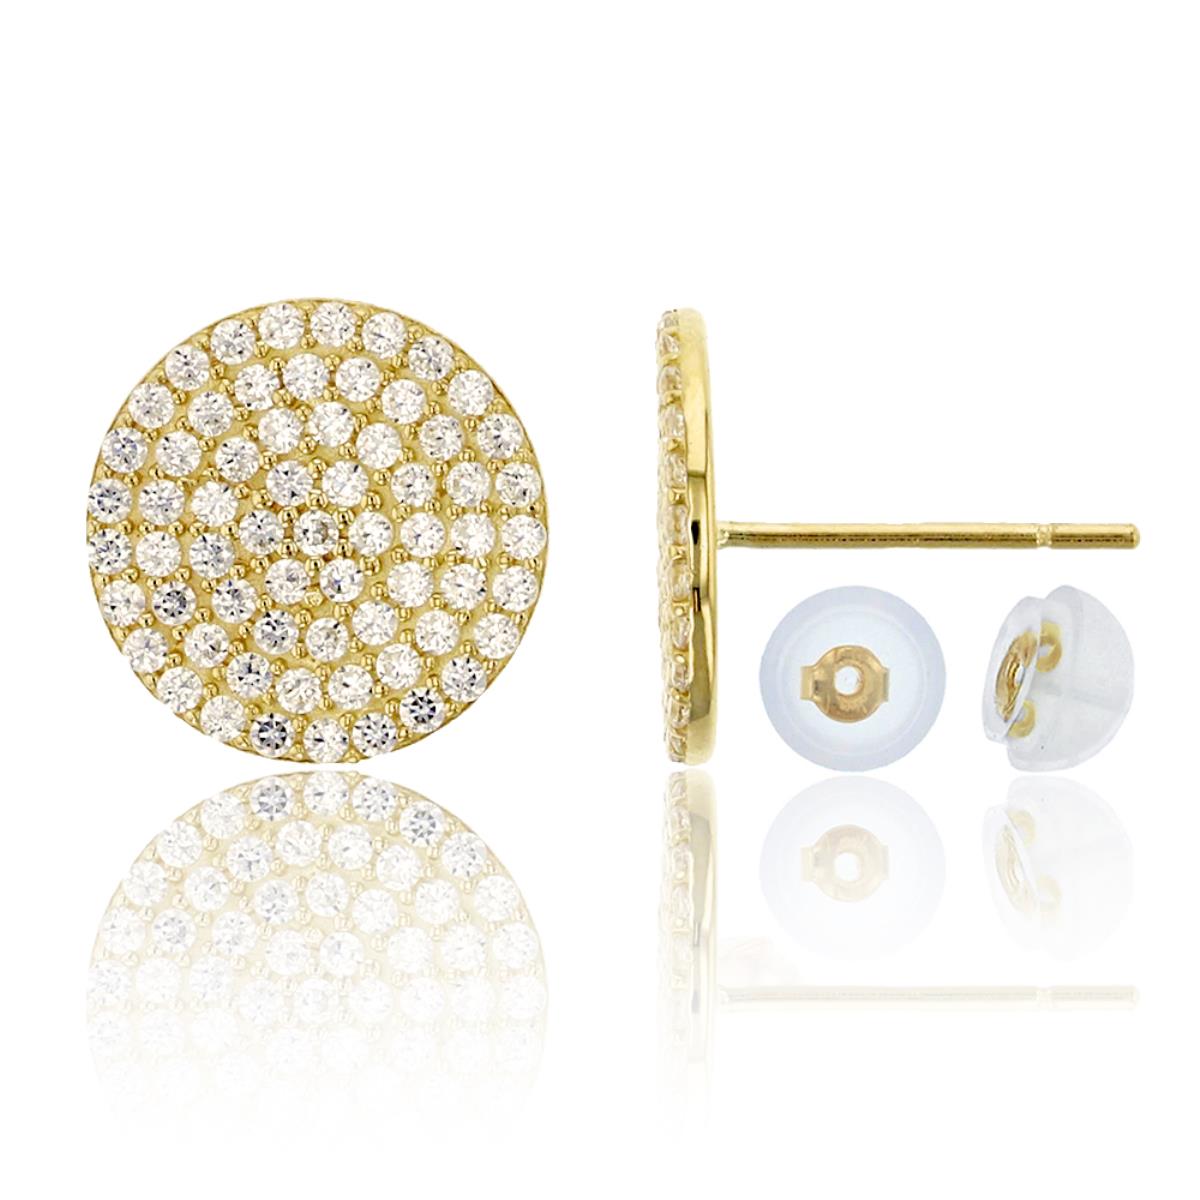 10K Yellow Gold Micropave 10mm Flat Circle Stud Earring & 10K Silicone Back